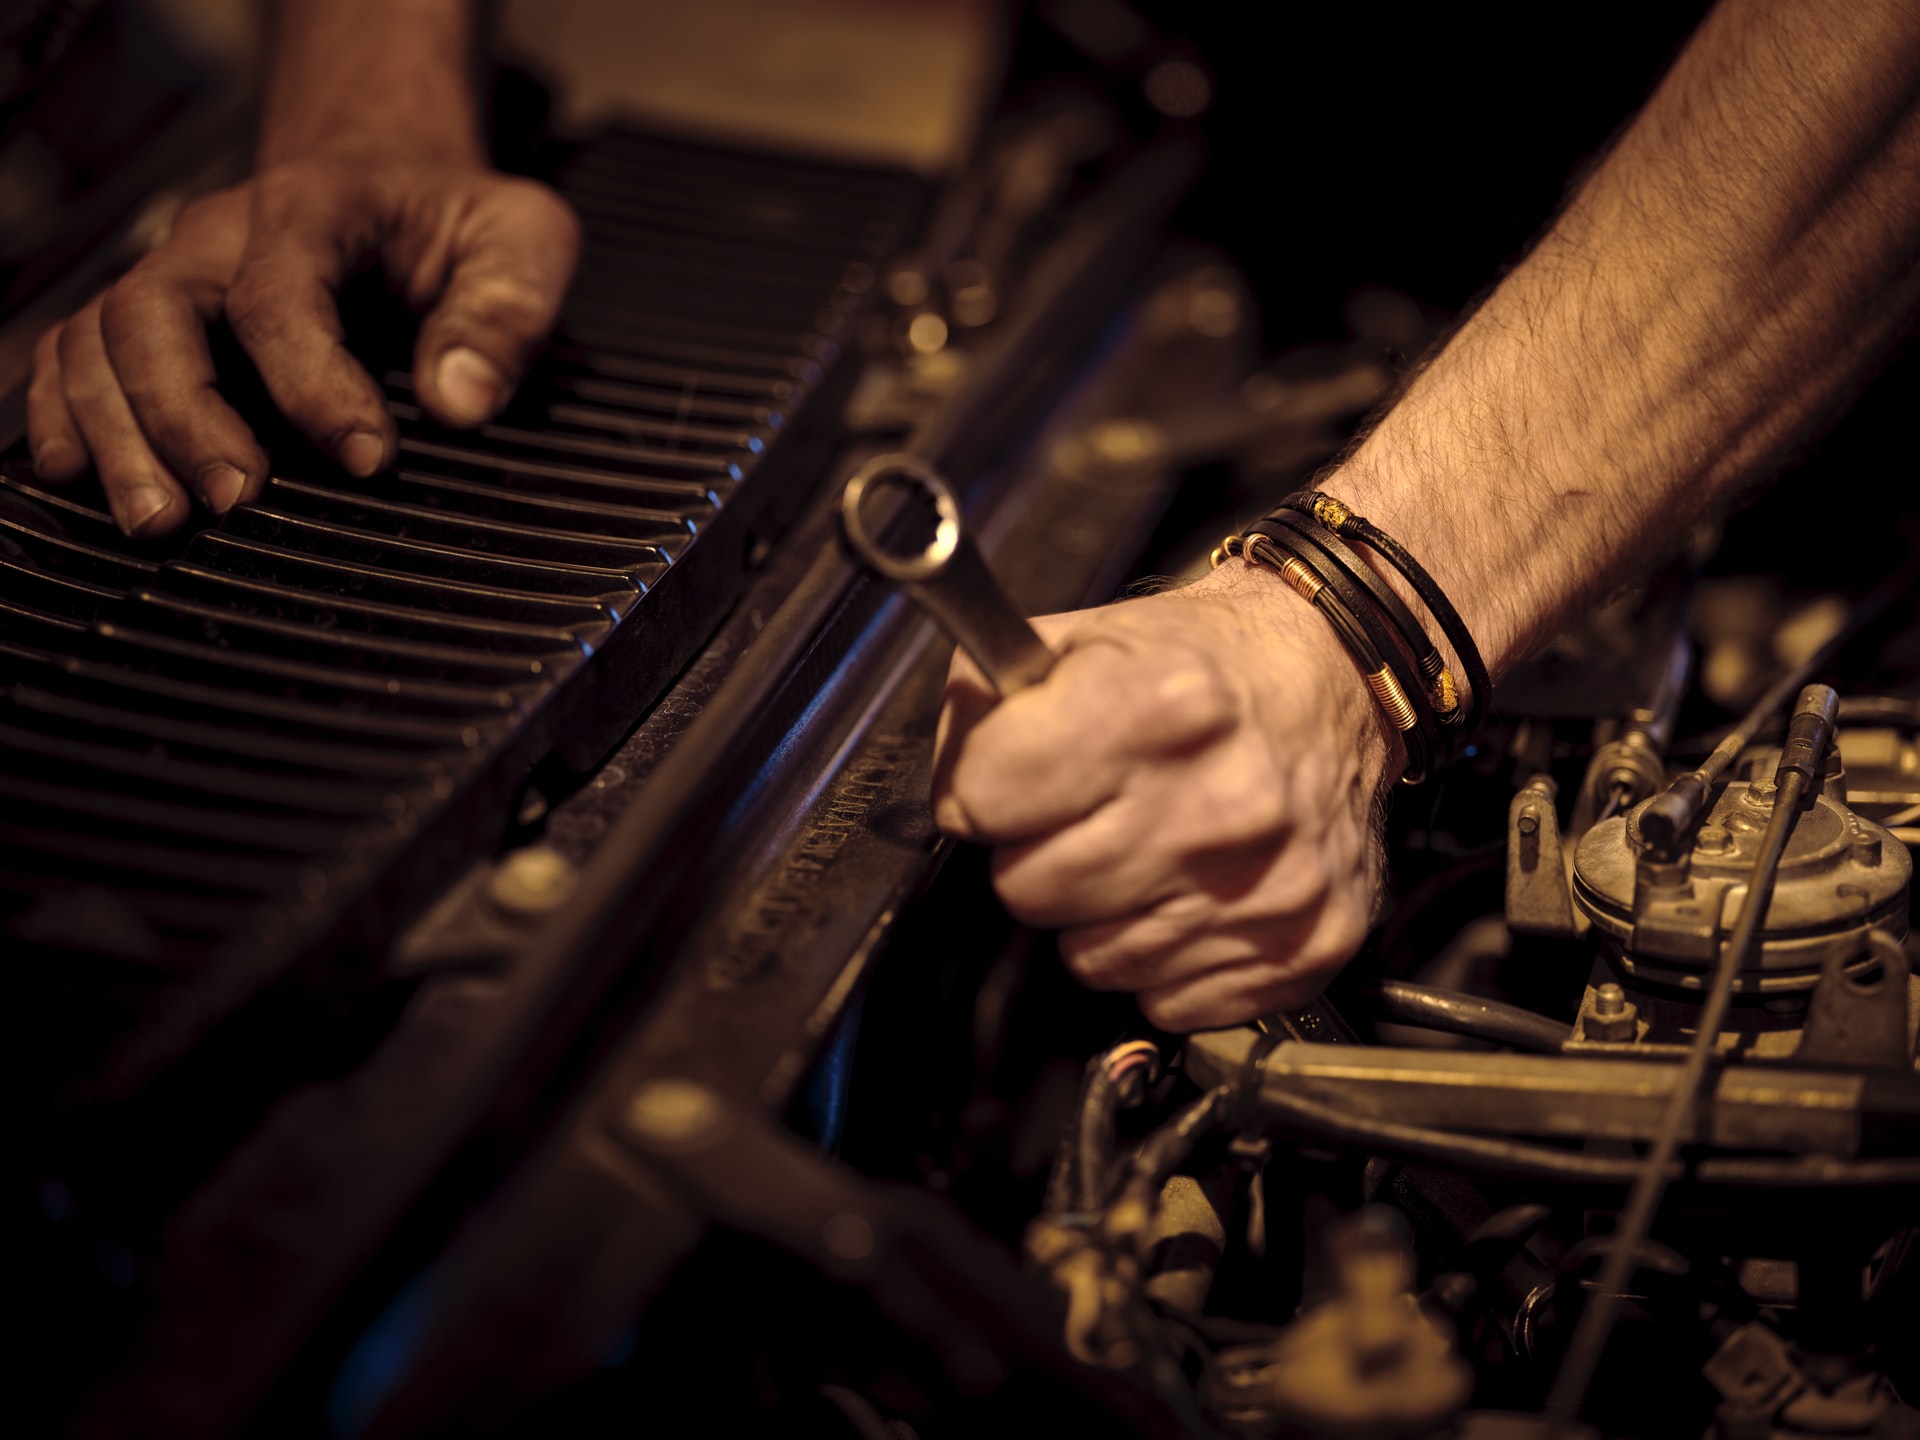 12 Car Maintenance Tips to Save You Money